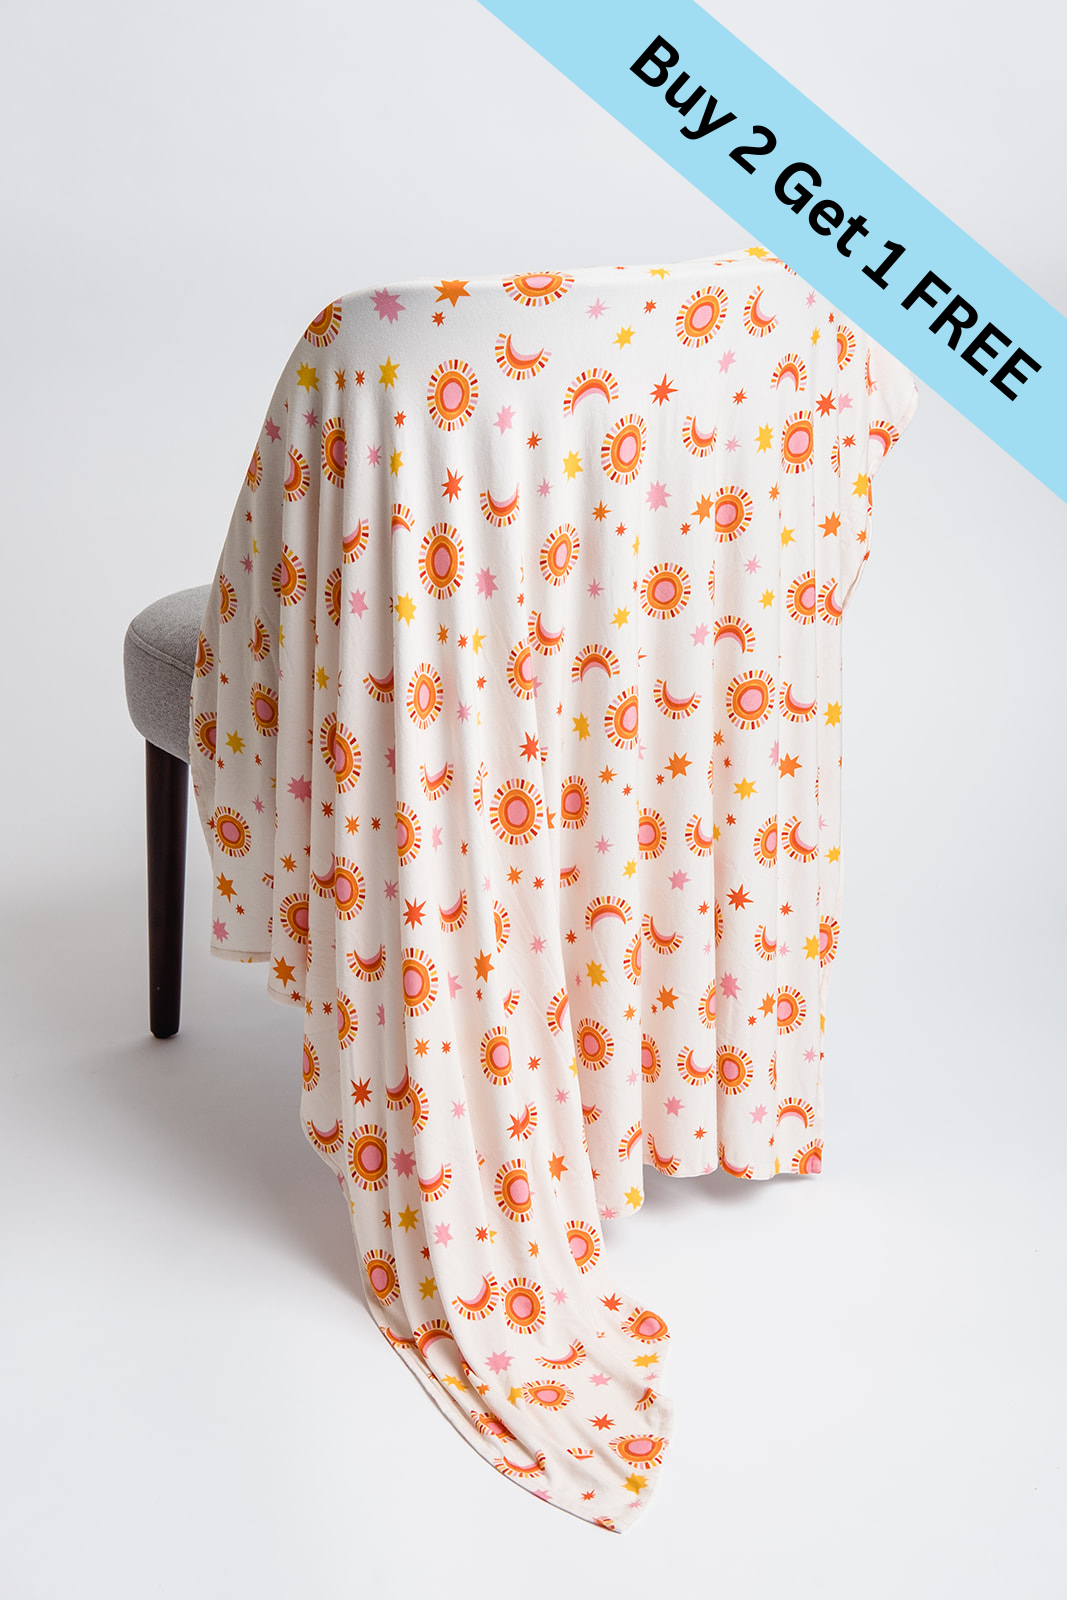 Sun and Moon Swaddle Blanket